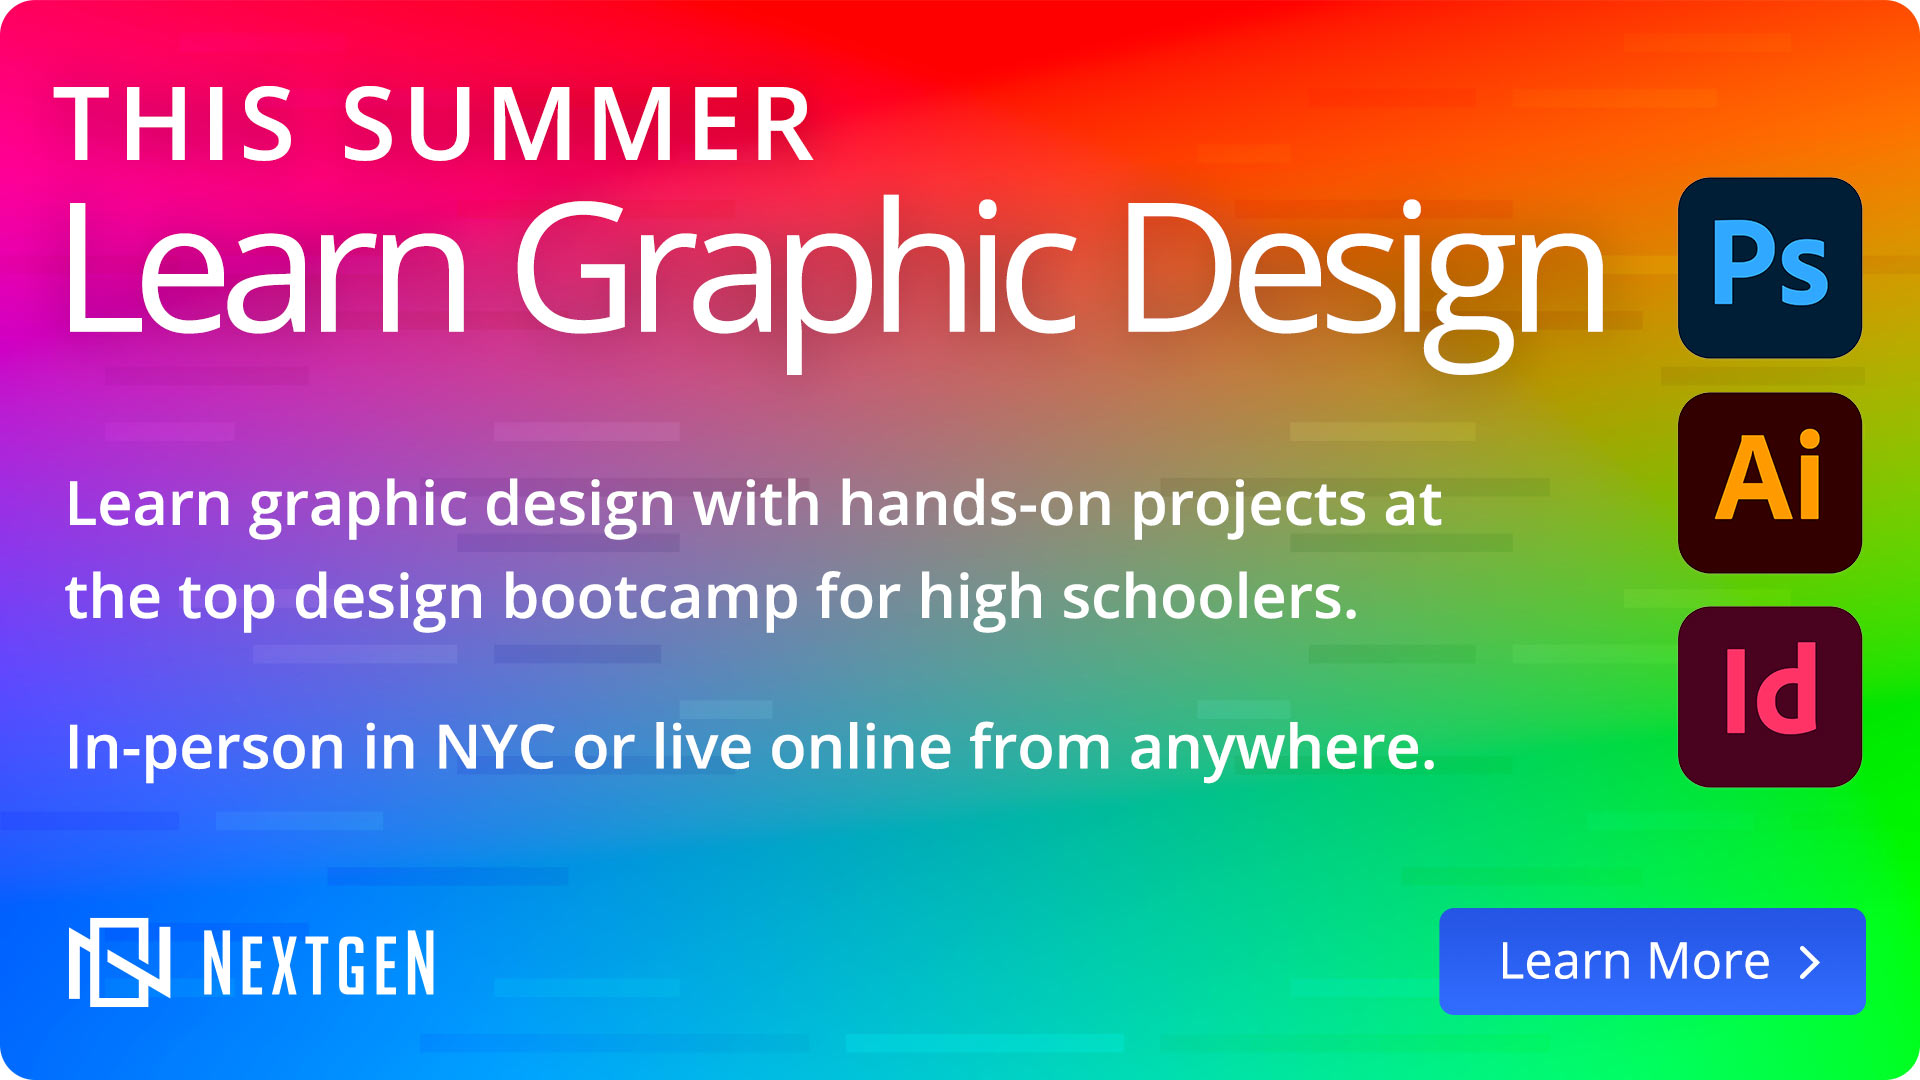 Learn Graphic Design This Summer